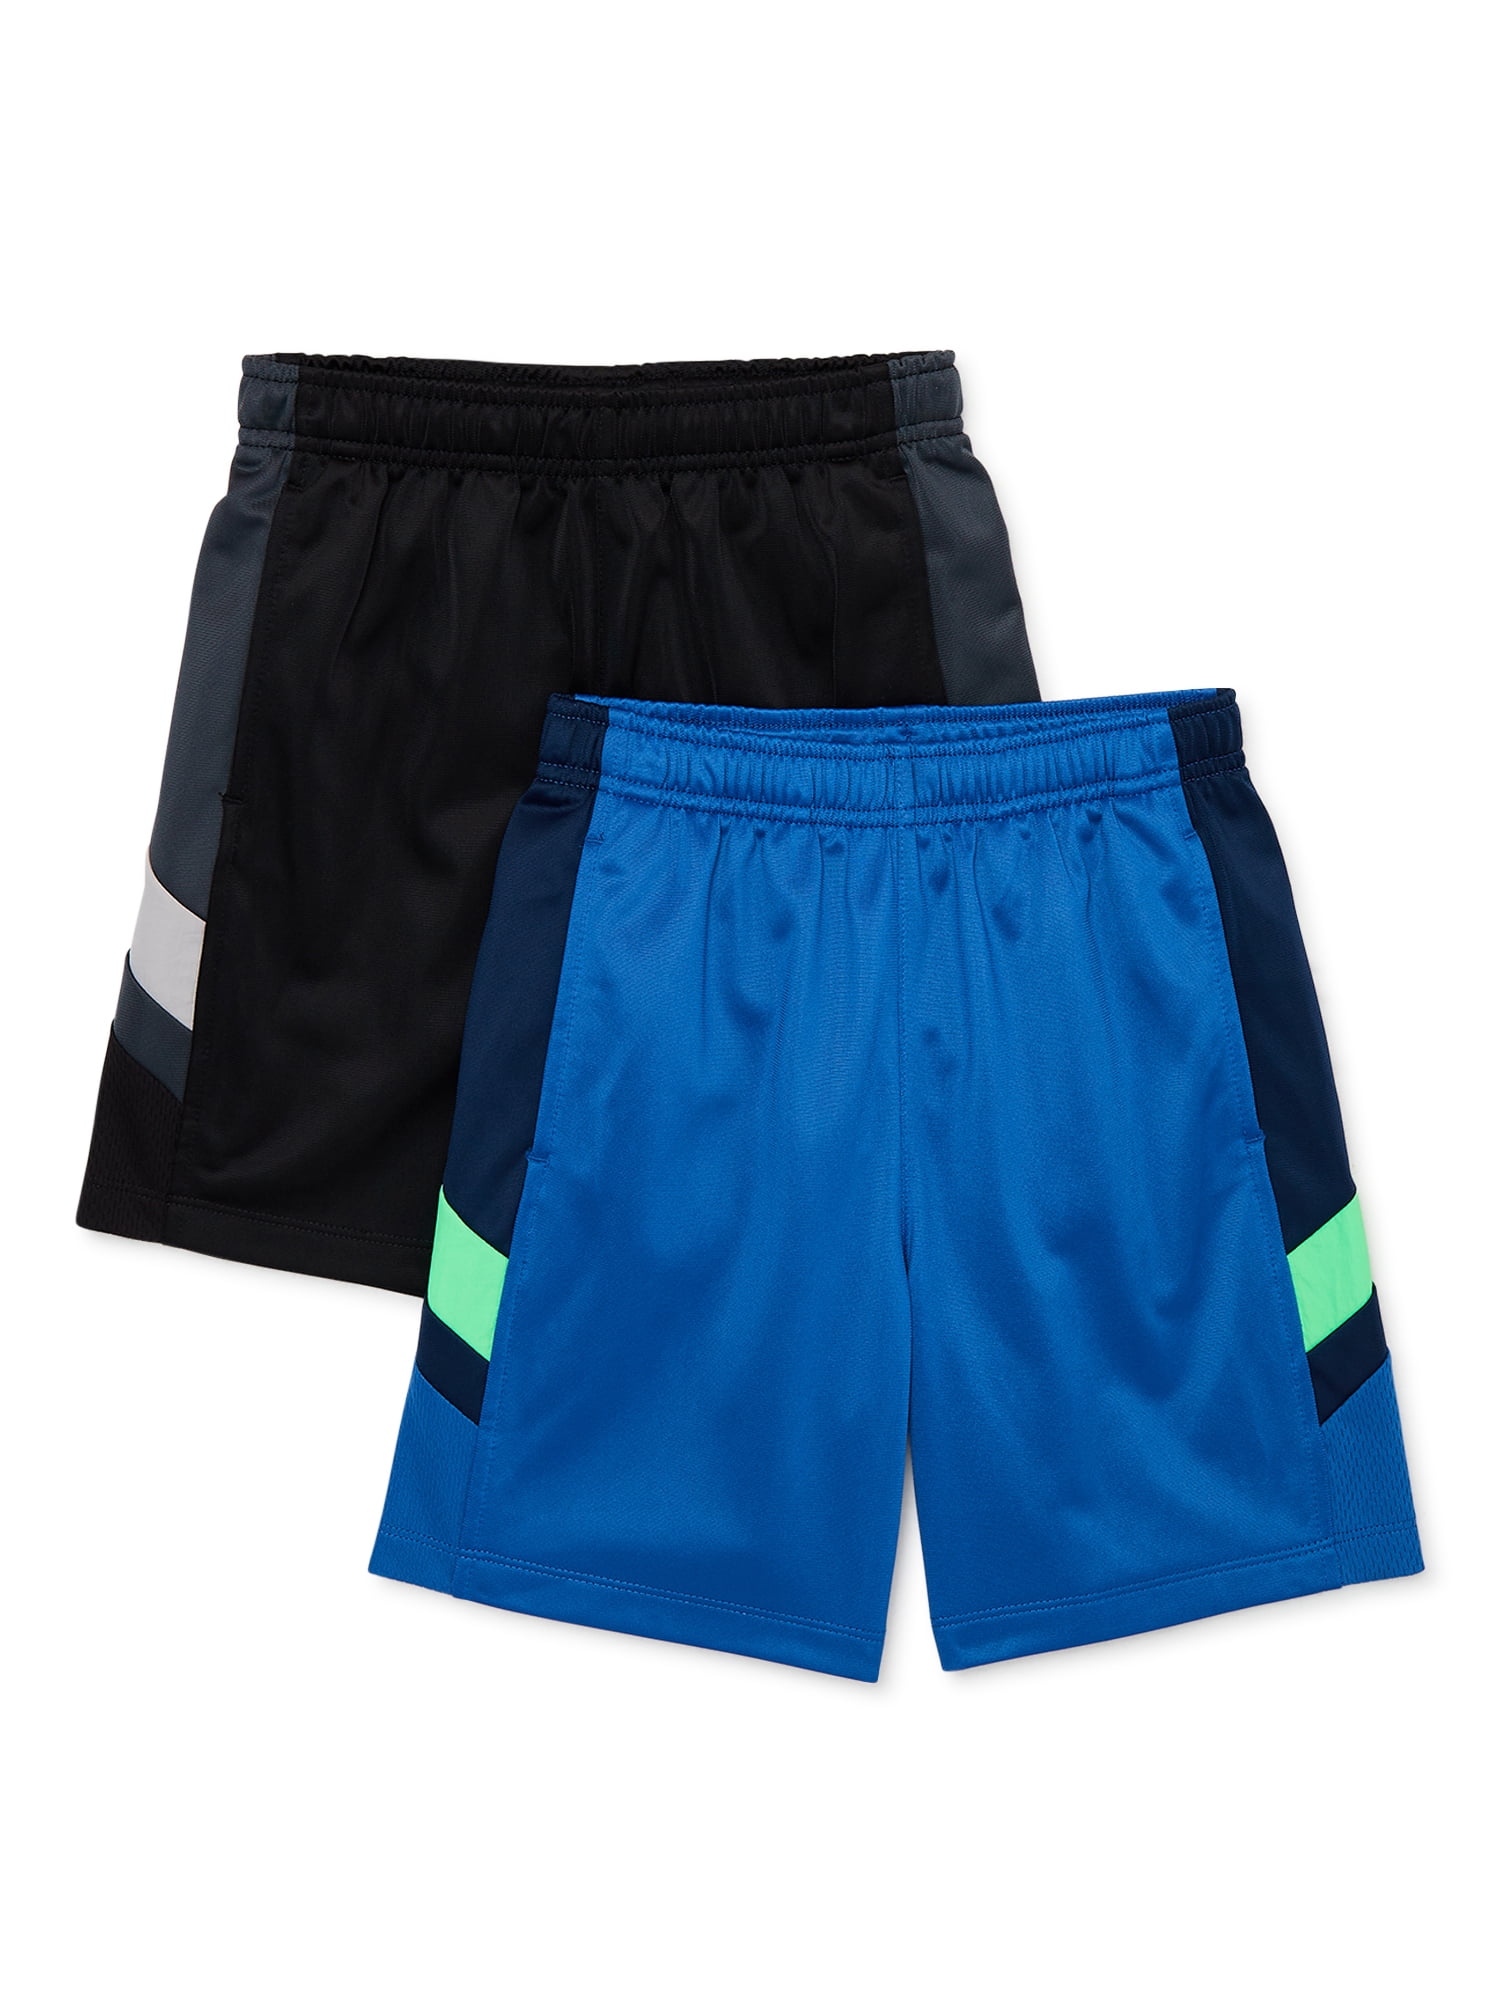 Athletic Works Boys Tricot Shorts, 2-Pack, Sizes 4-18 - Walmart.com